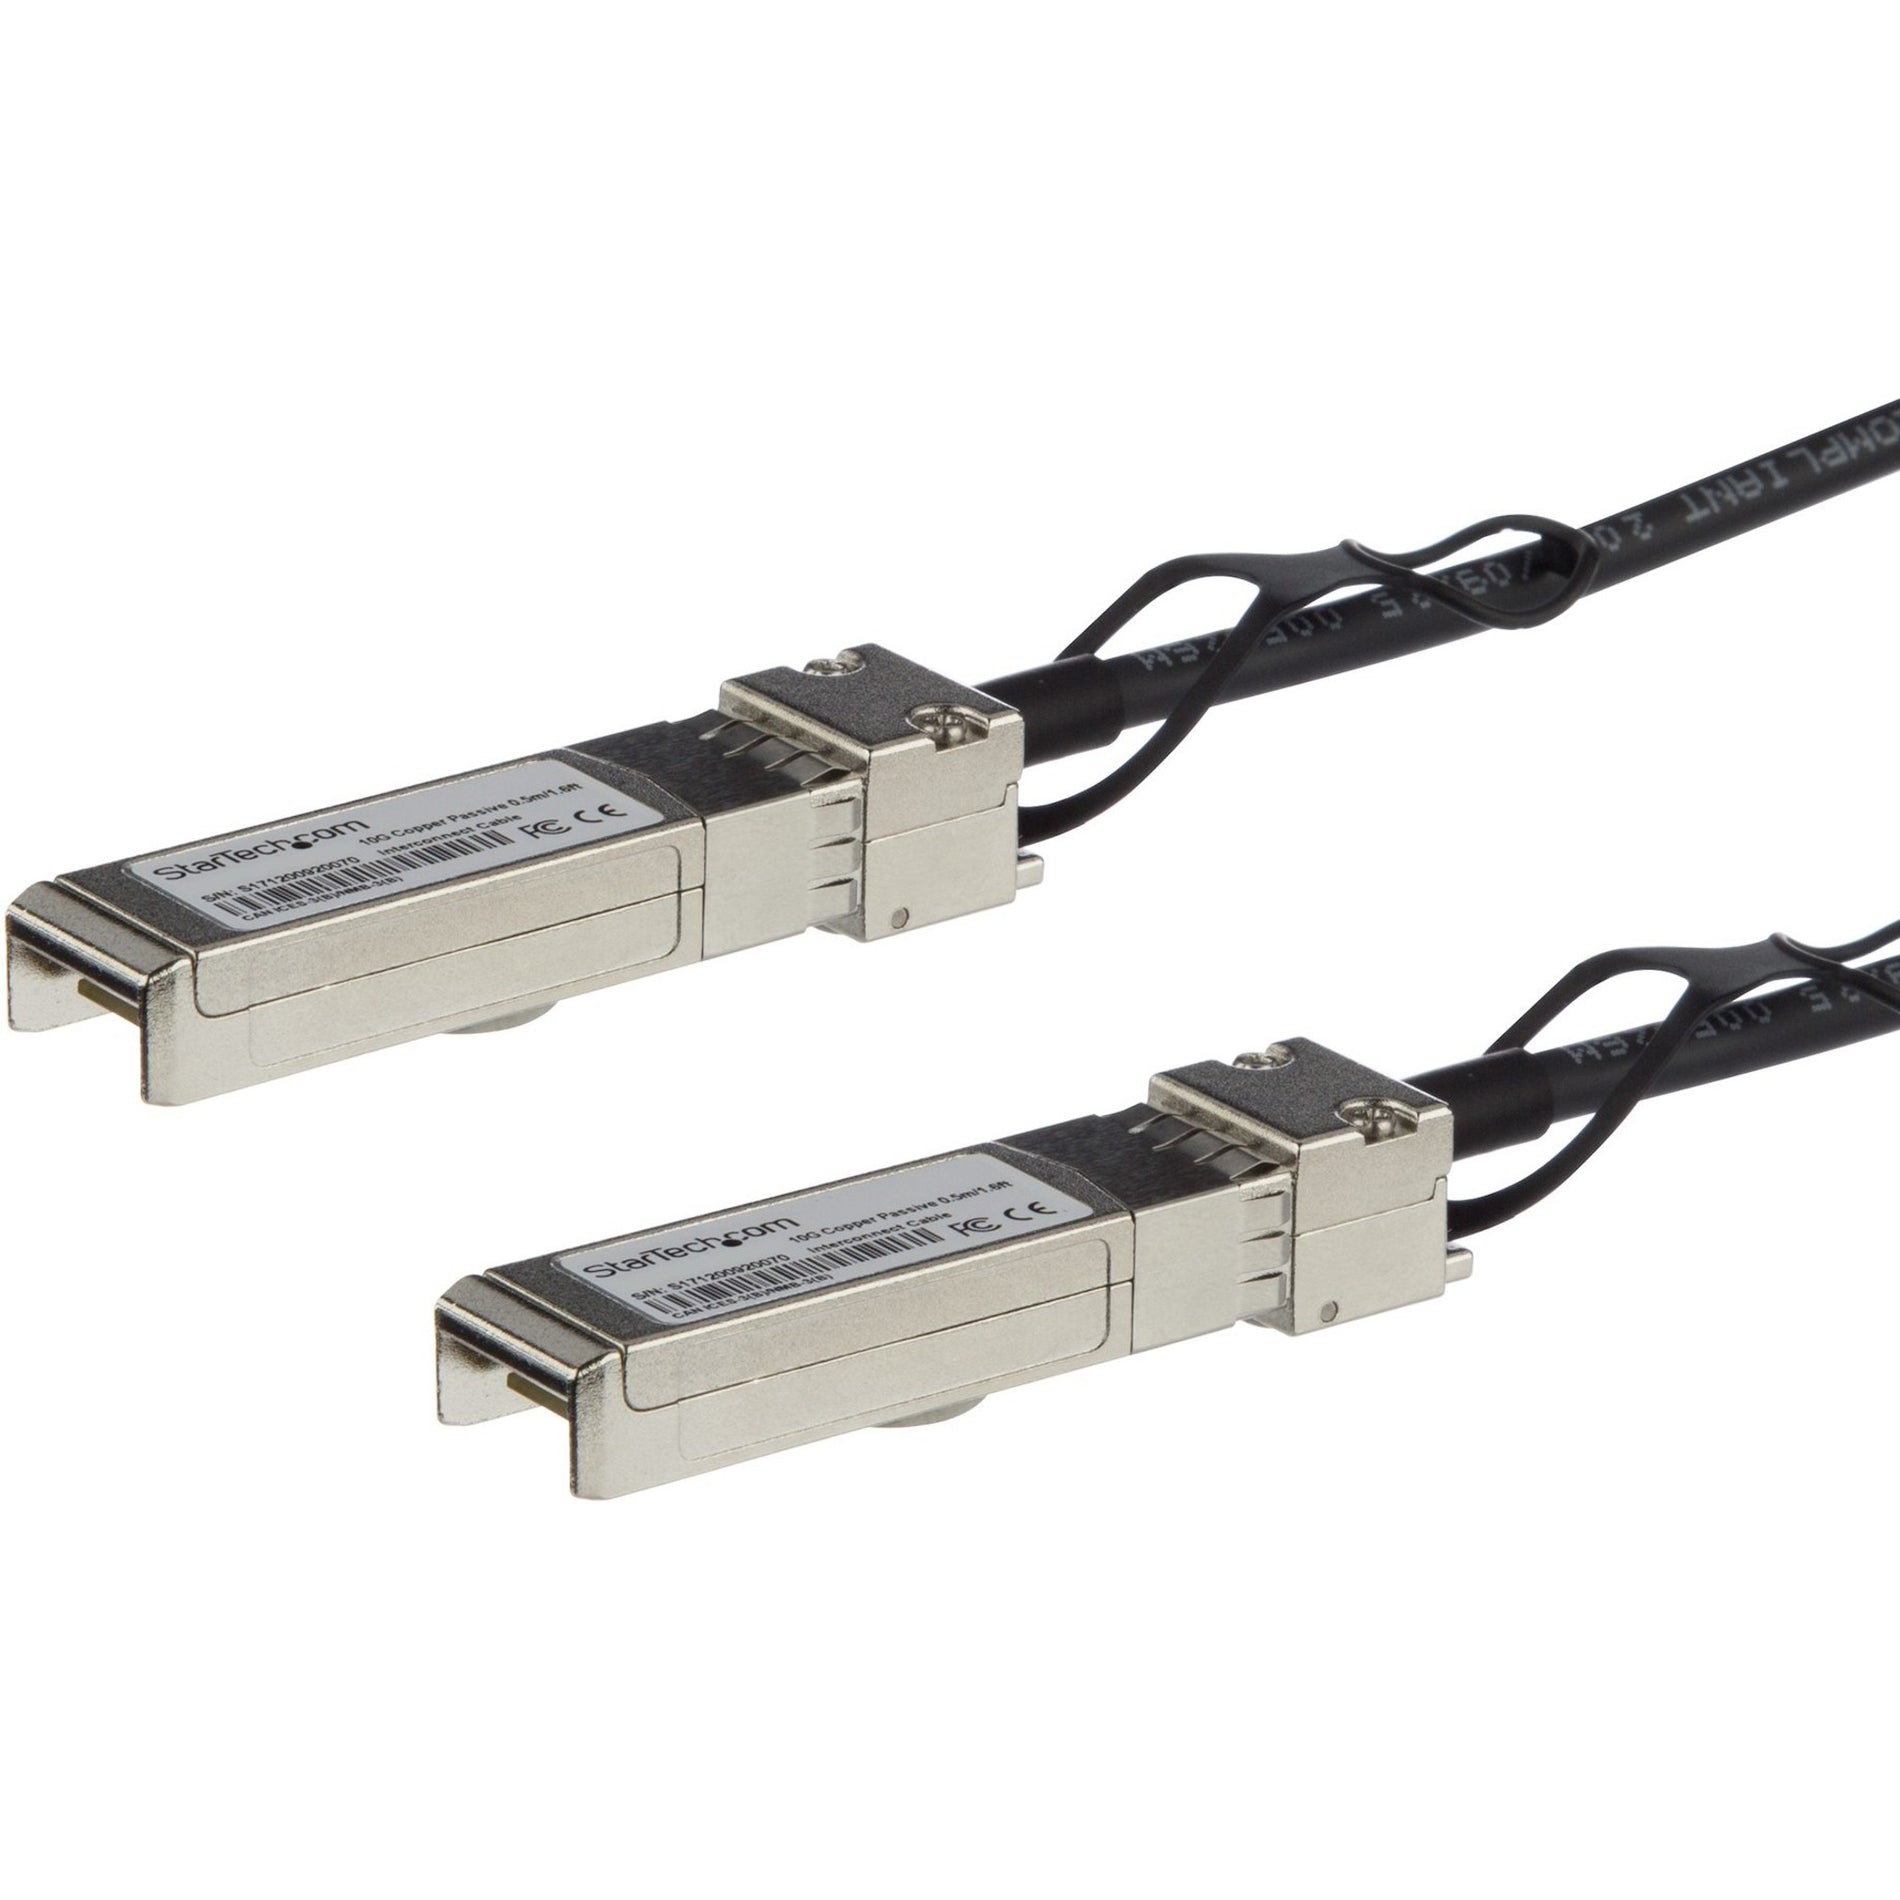 StarTech.com SFP10GPC1M SFP+ Direct Attach Cable - MSA Compliant - 1 m (3.3 ft.), Passive, Hot-swappable, 10 Gbit/s Data Transfer Rate, Twinaxial Network Cable